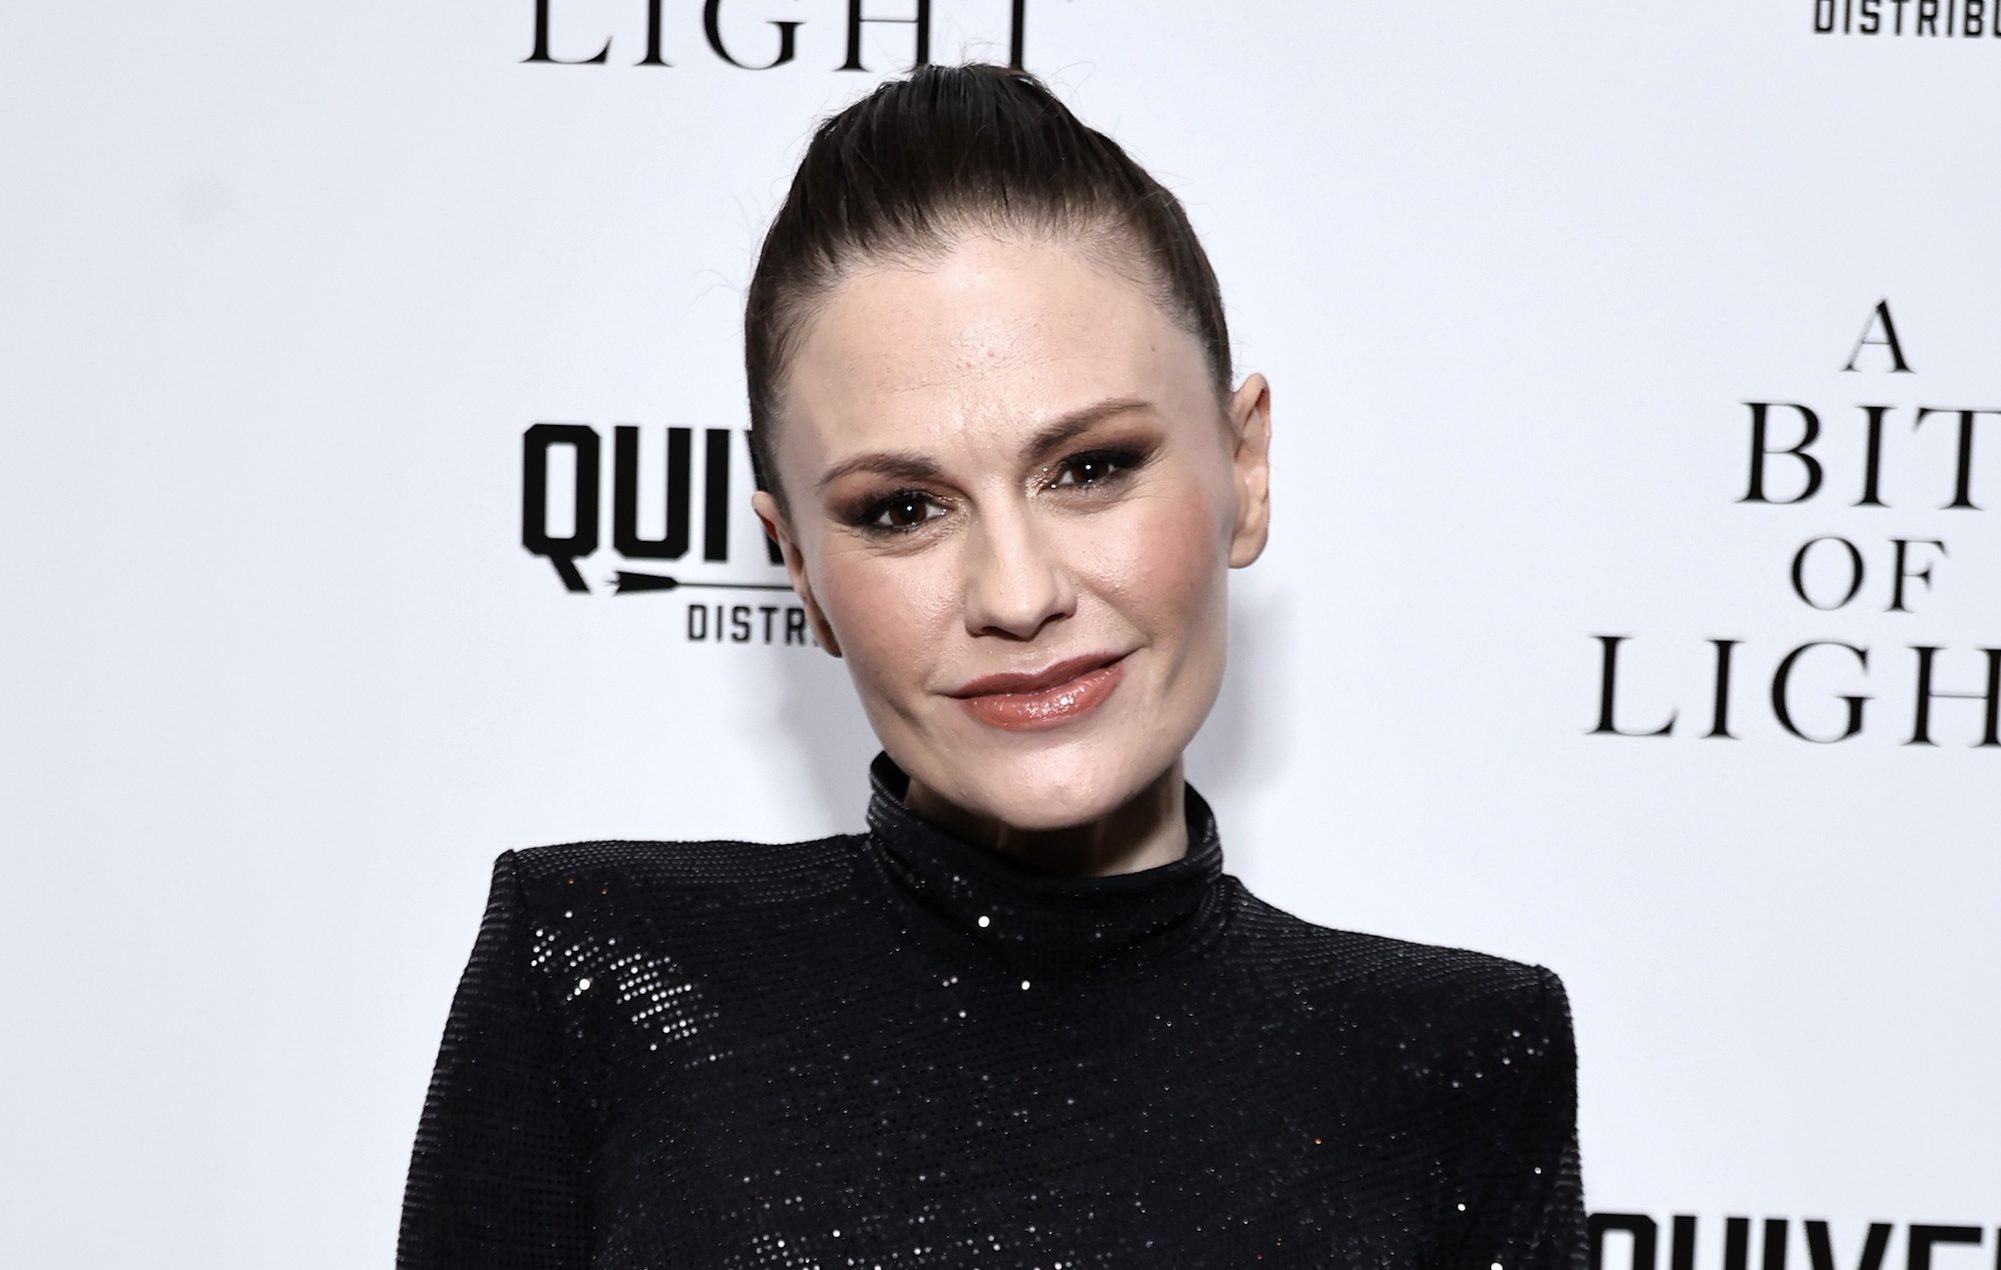 Anna Paquin battles health issues to walk red carpet with cane